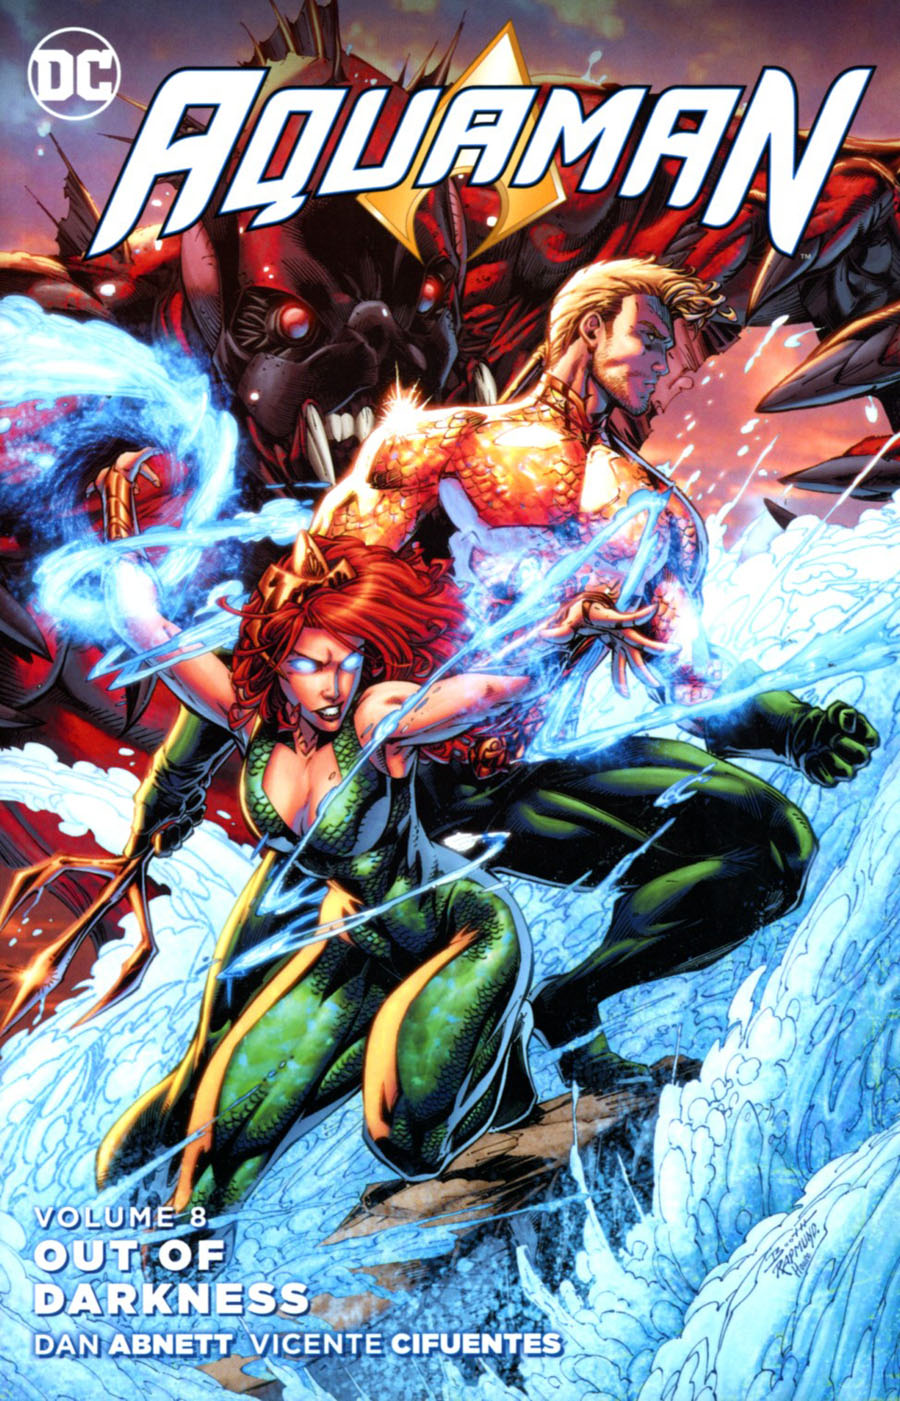 Aquaman (New 52) Vol 8 Out Of Darkness TP